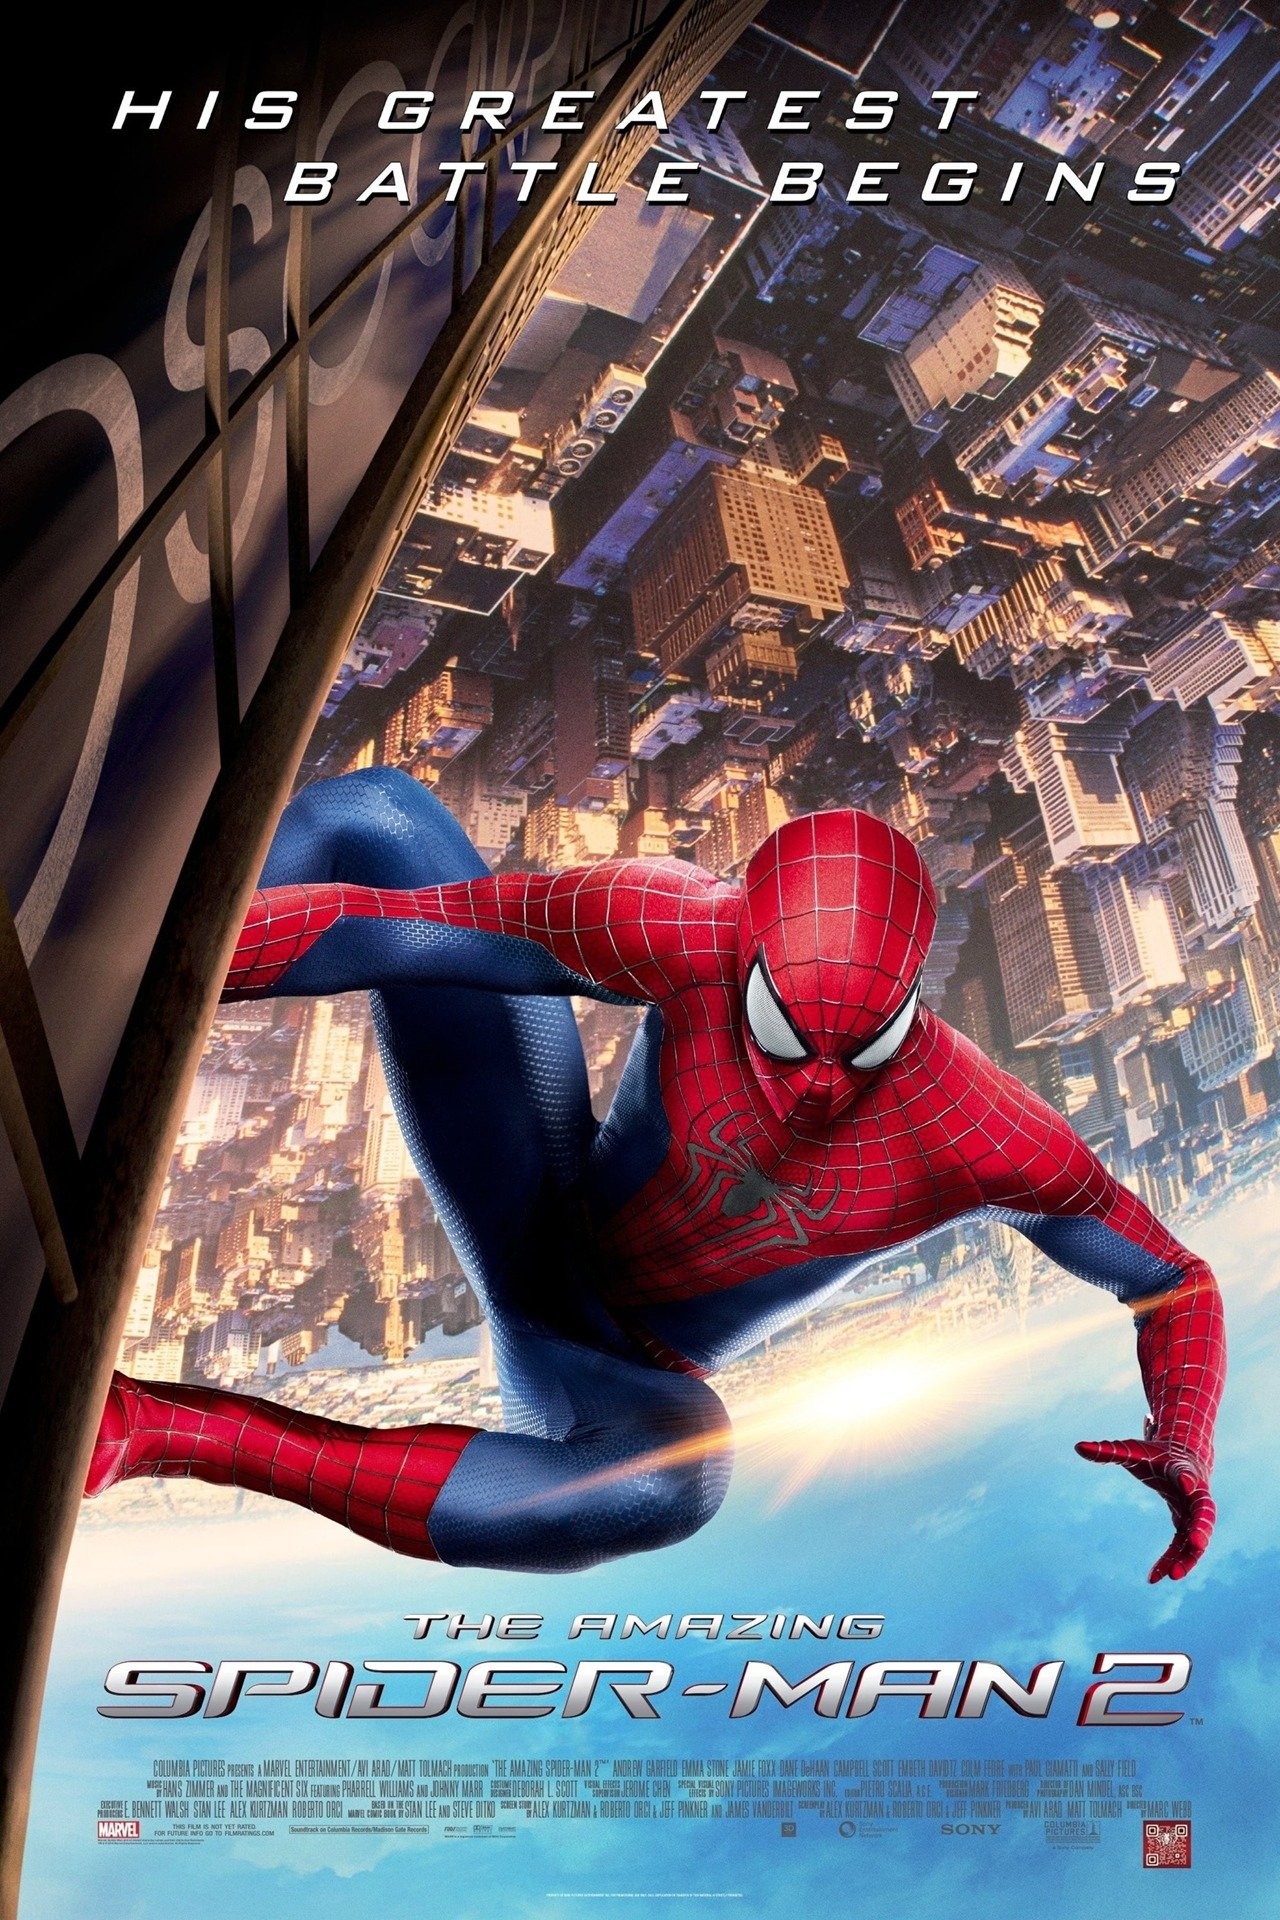 Spider-Man 2 release date and pre-order details are coming 'soon